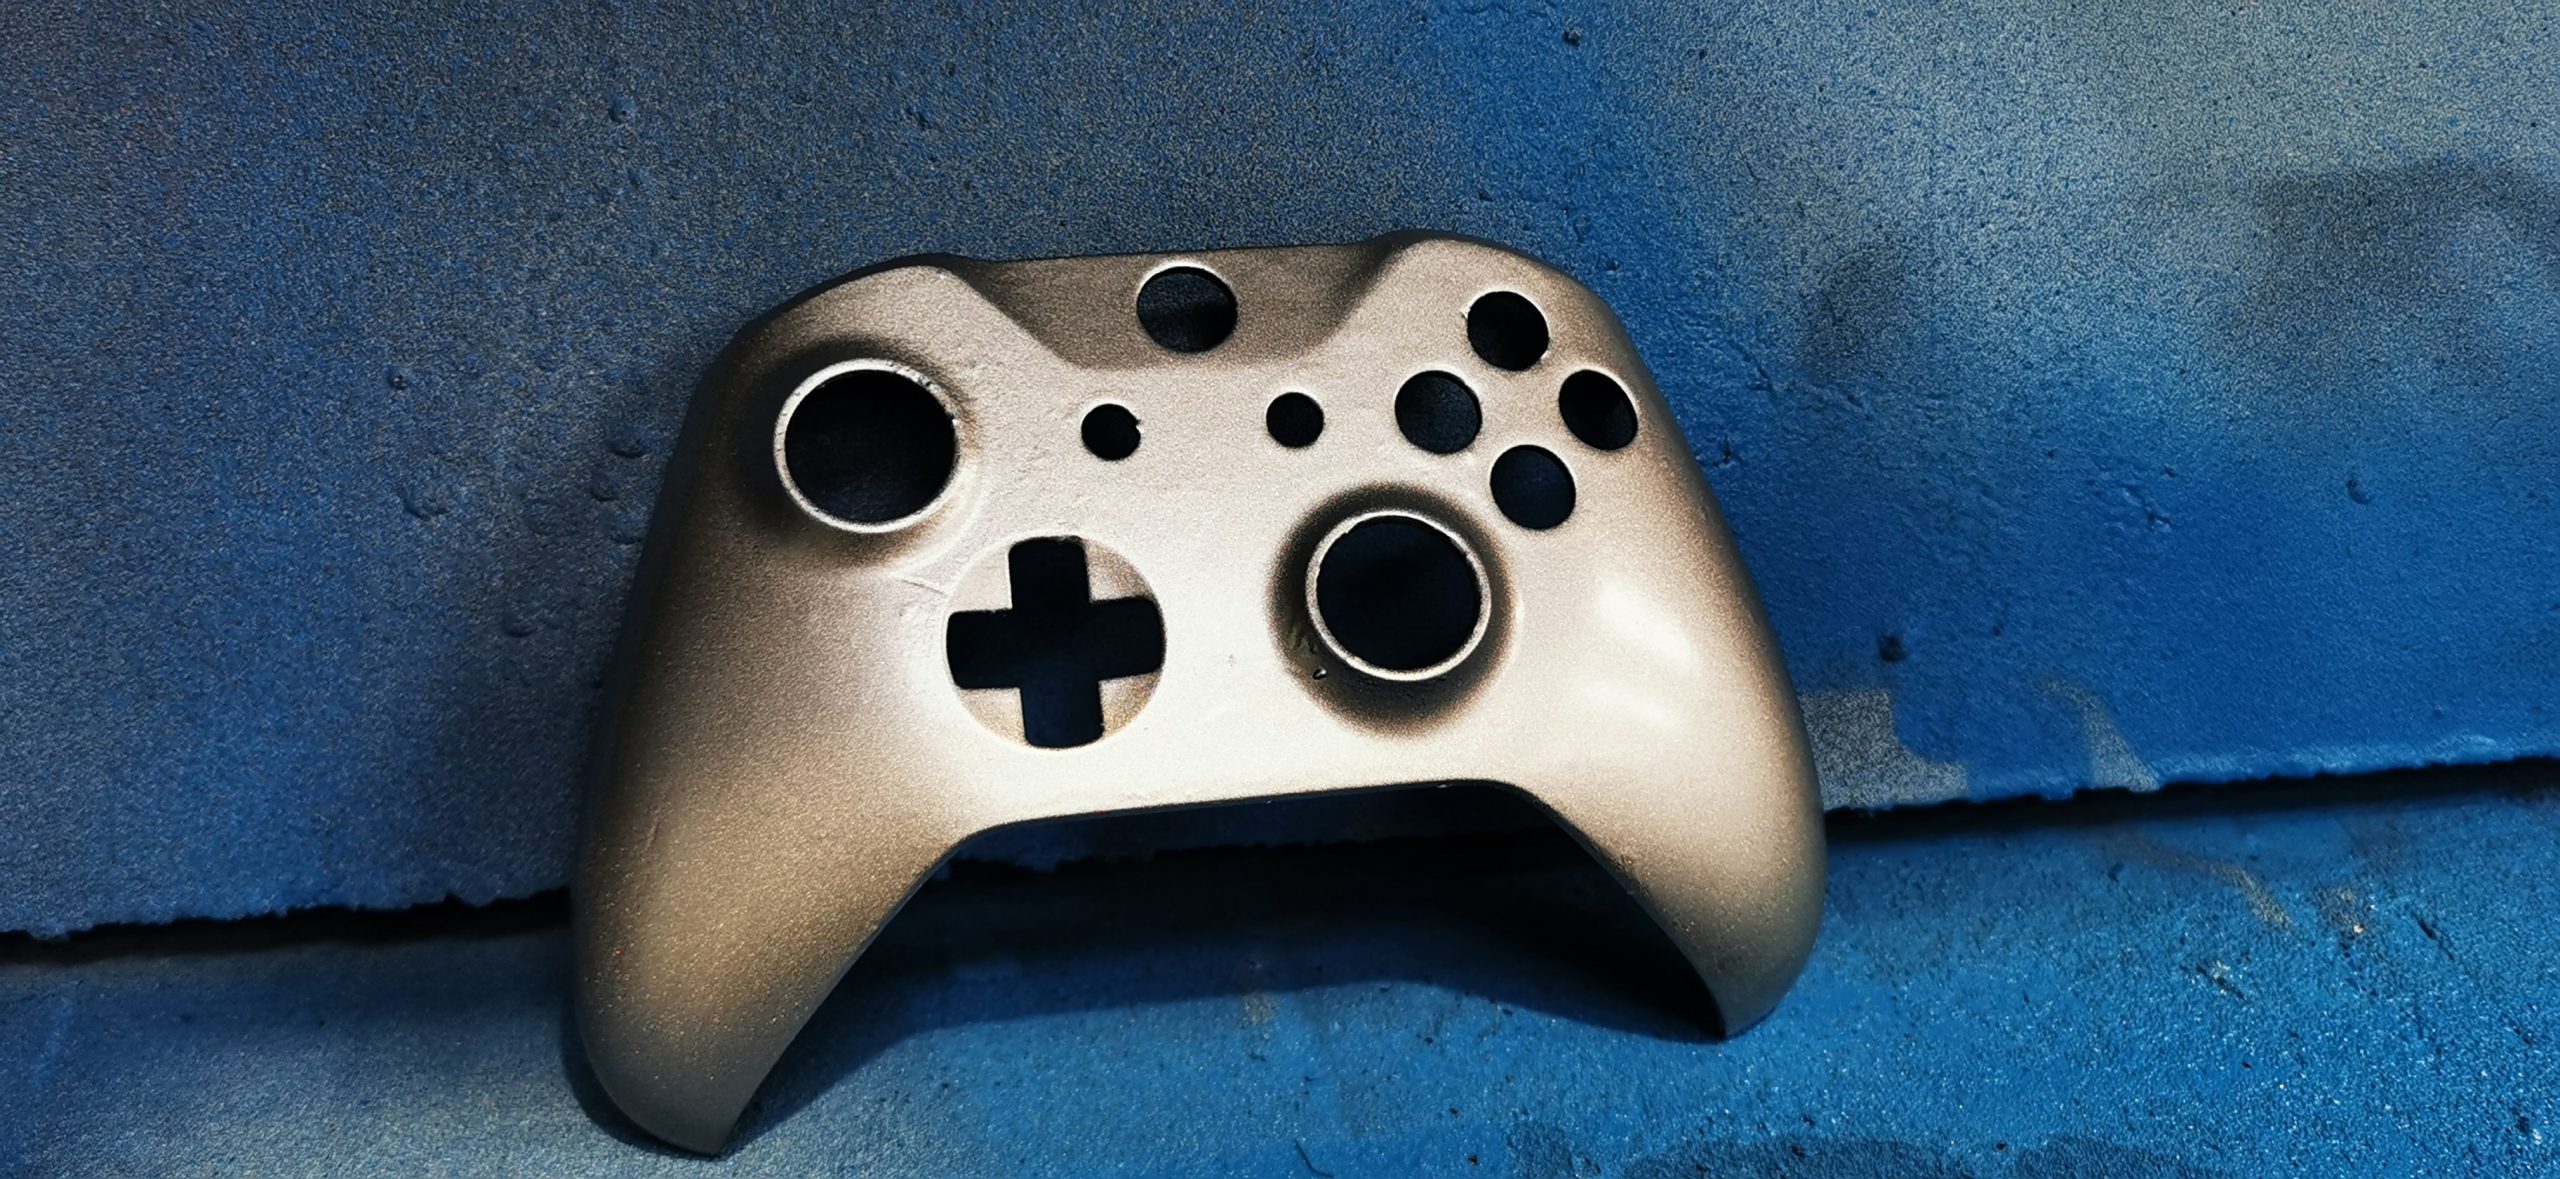 finished controller